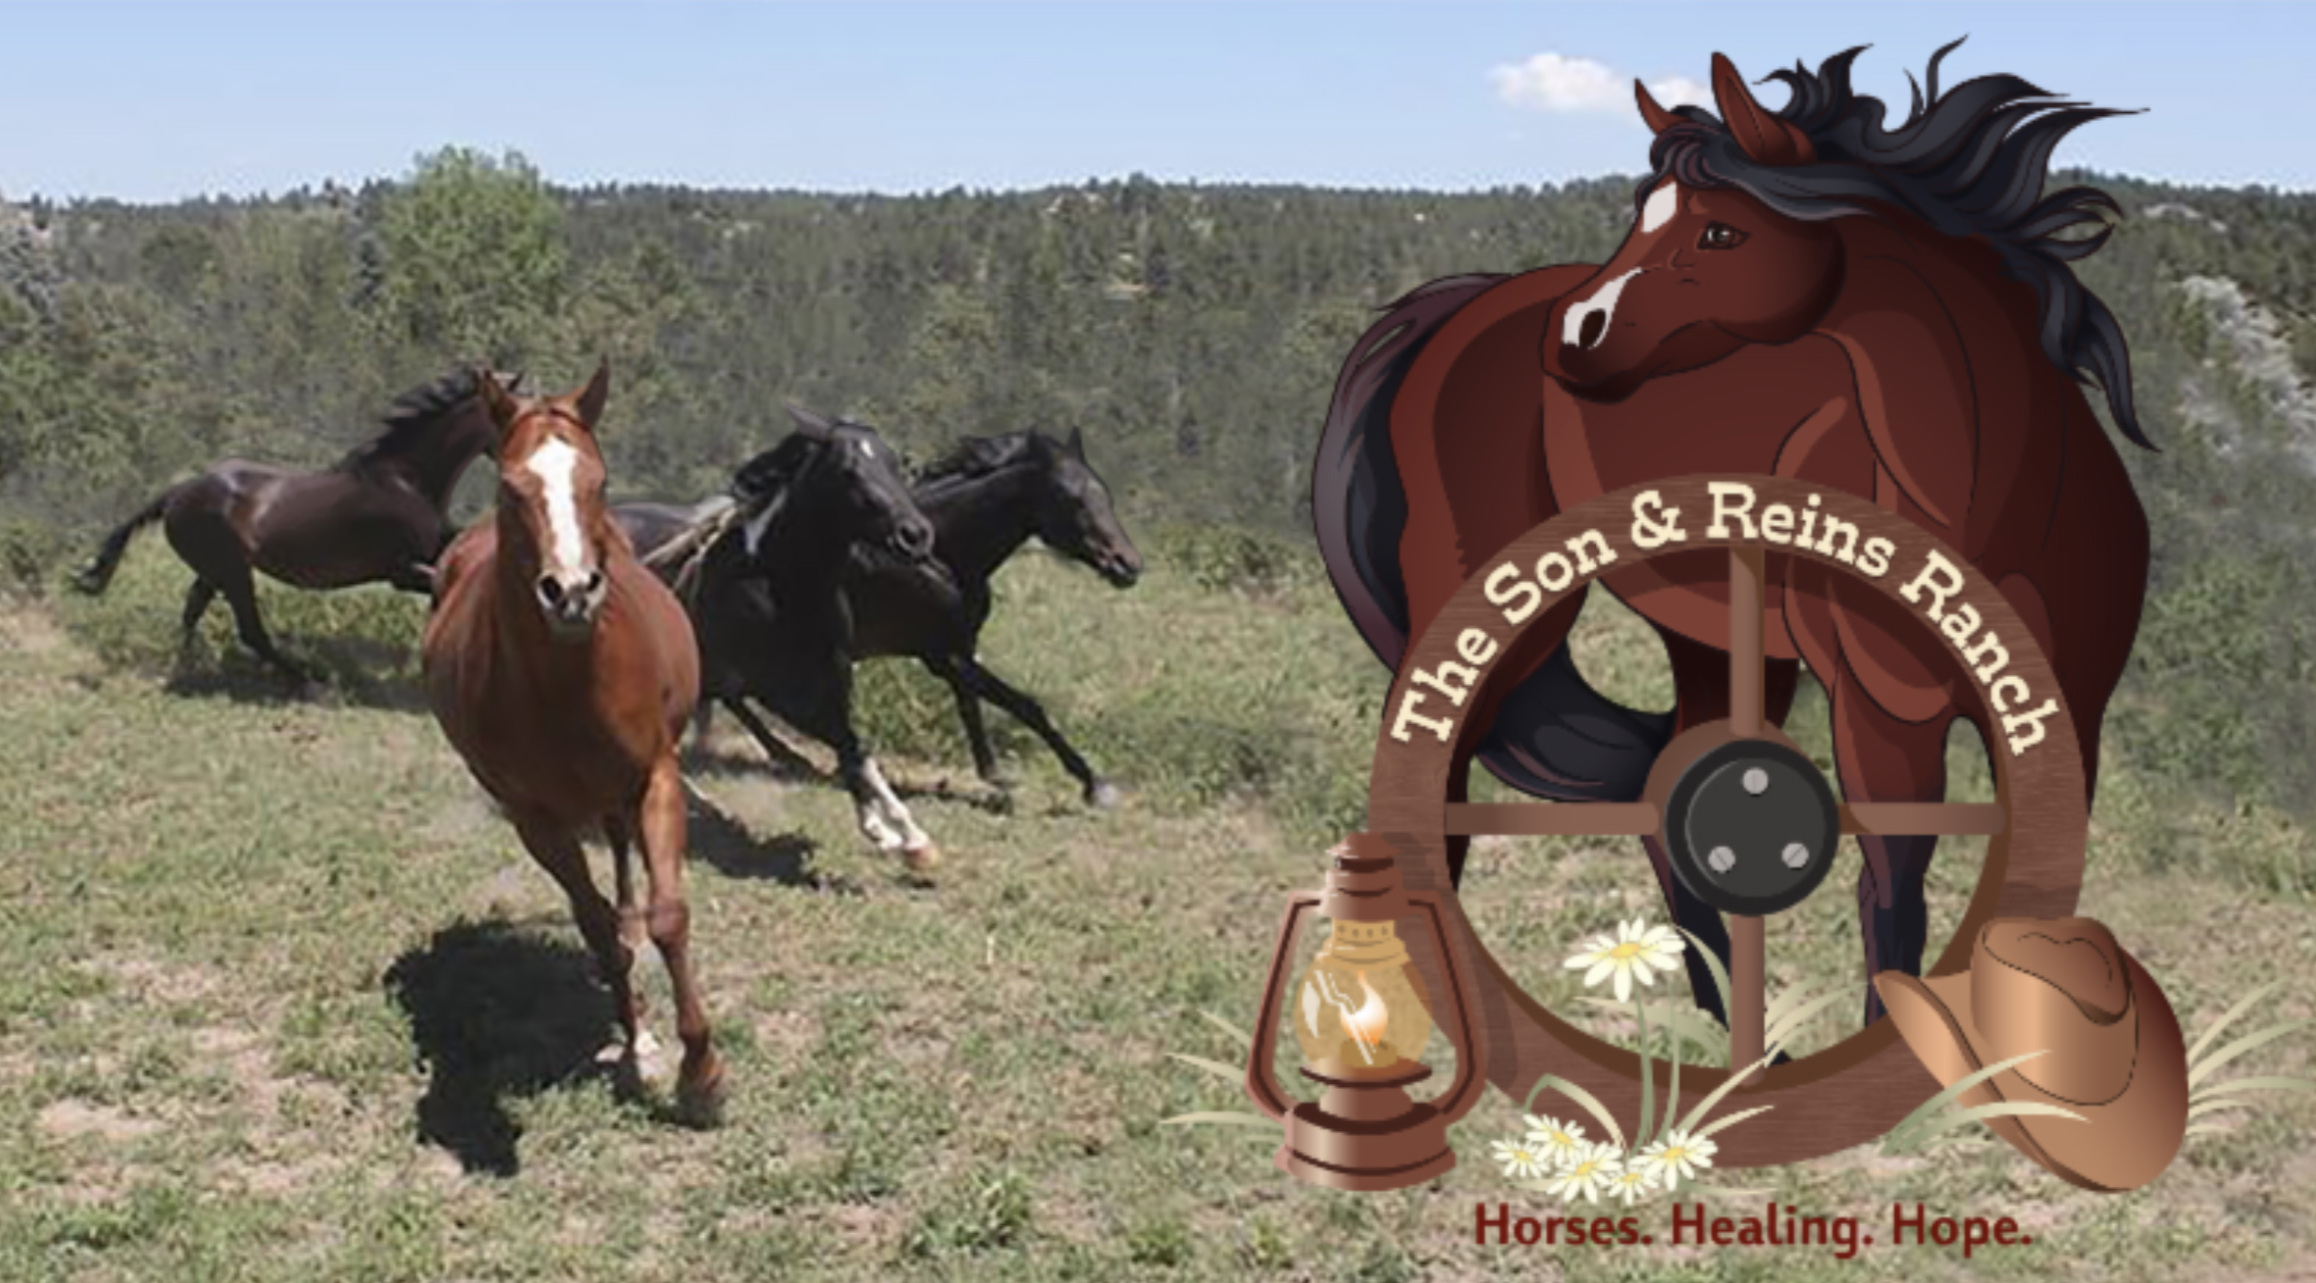 The Son and Reins Ranch logo with photo of our horses running